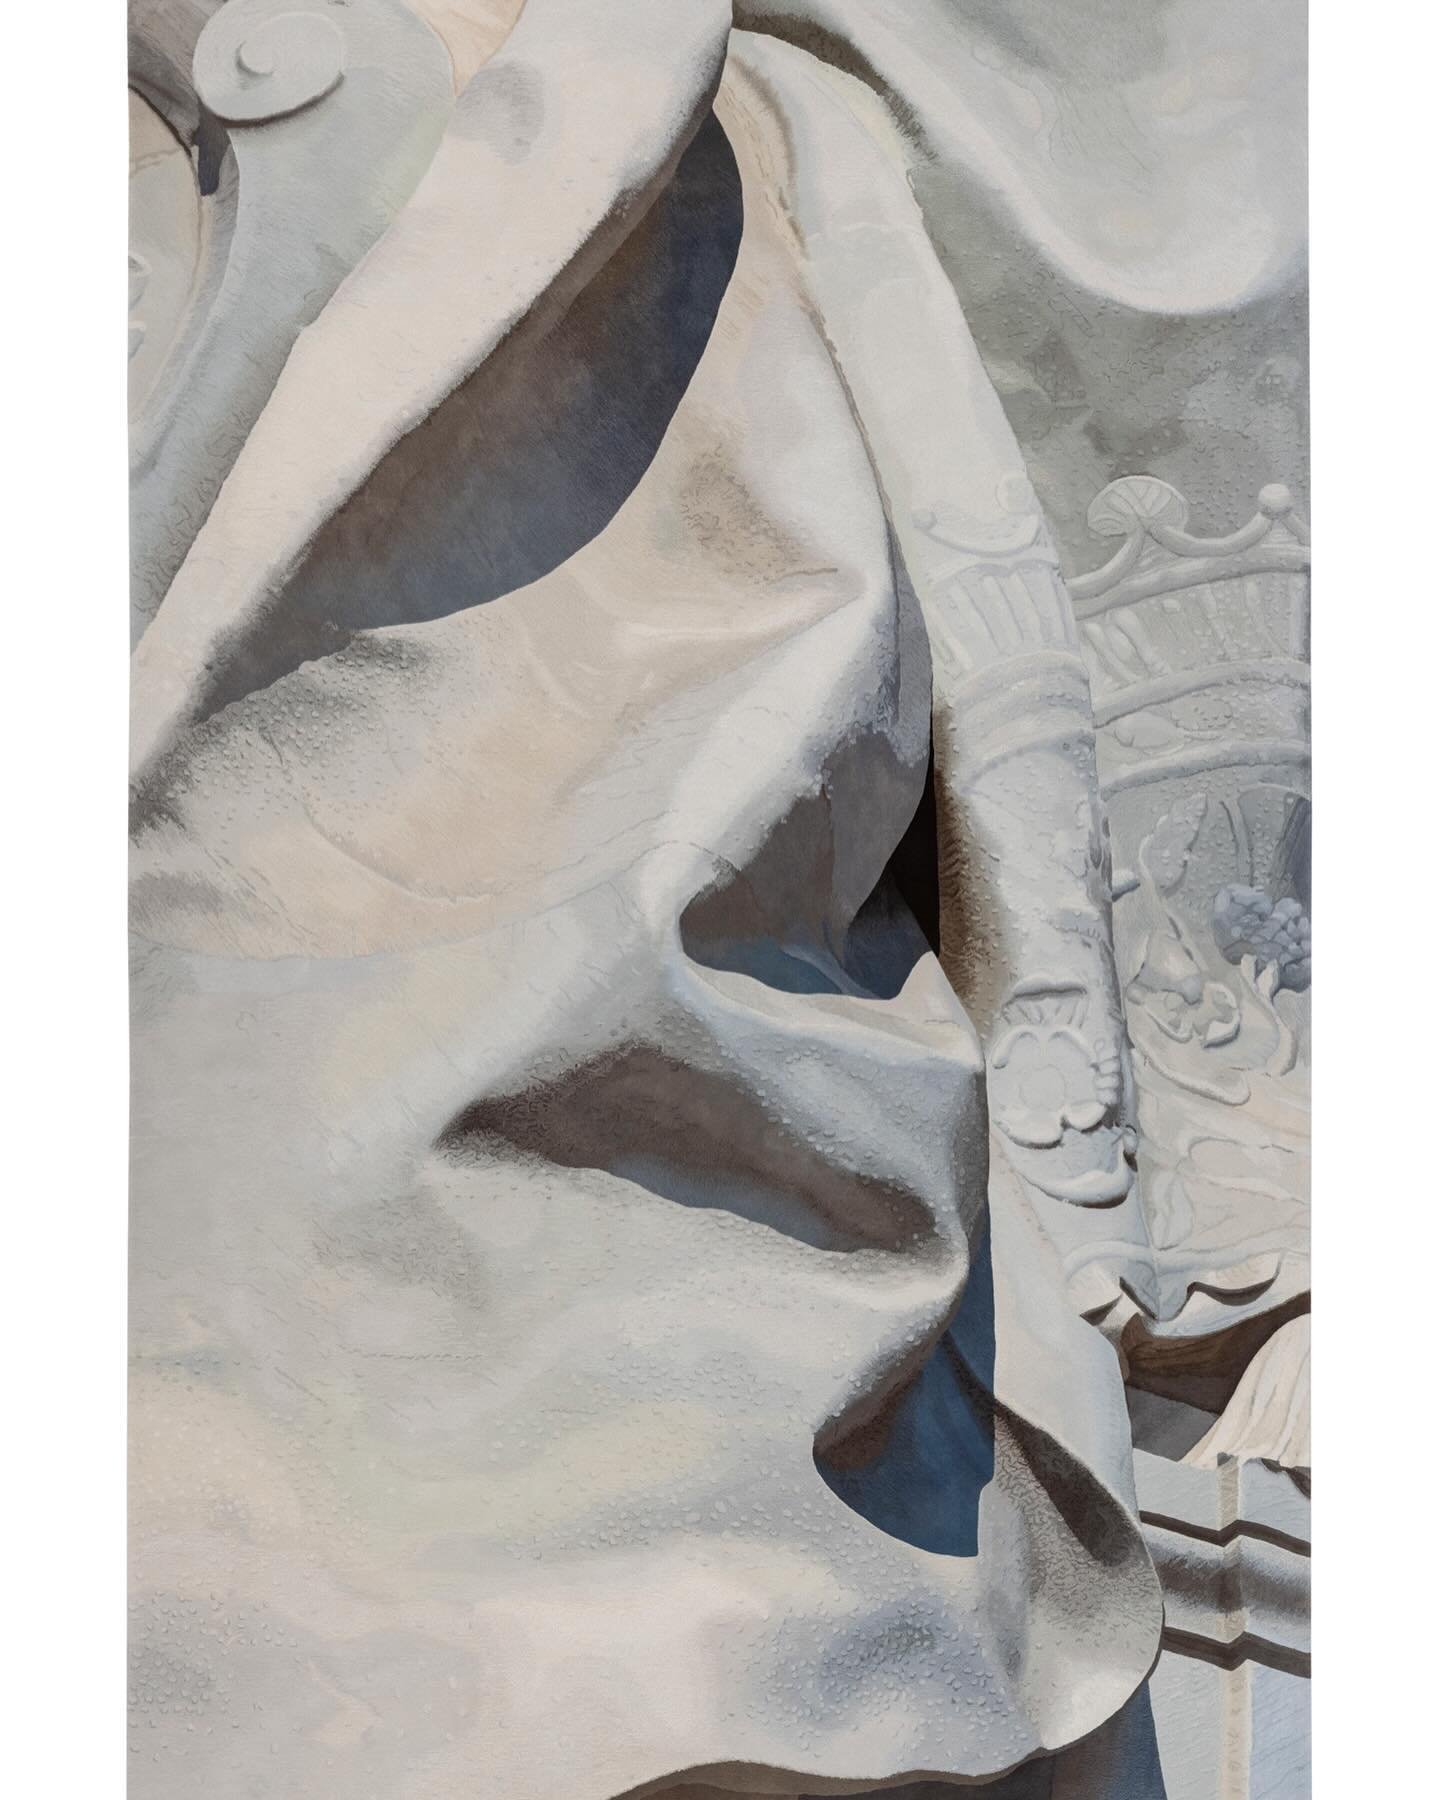 For London Craft Week 2024, @taipingcarpets unveils a photorealism tapestry of the iconic Queen Victoria memorial statue at its new Fulham Road showroom. Inspired by the natural beauty of Carrara marble, the wall hanging depicts an abstracted section